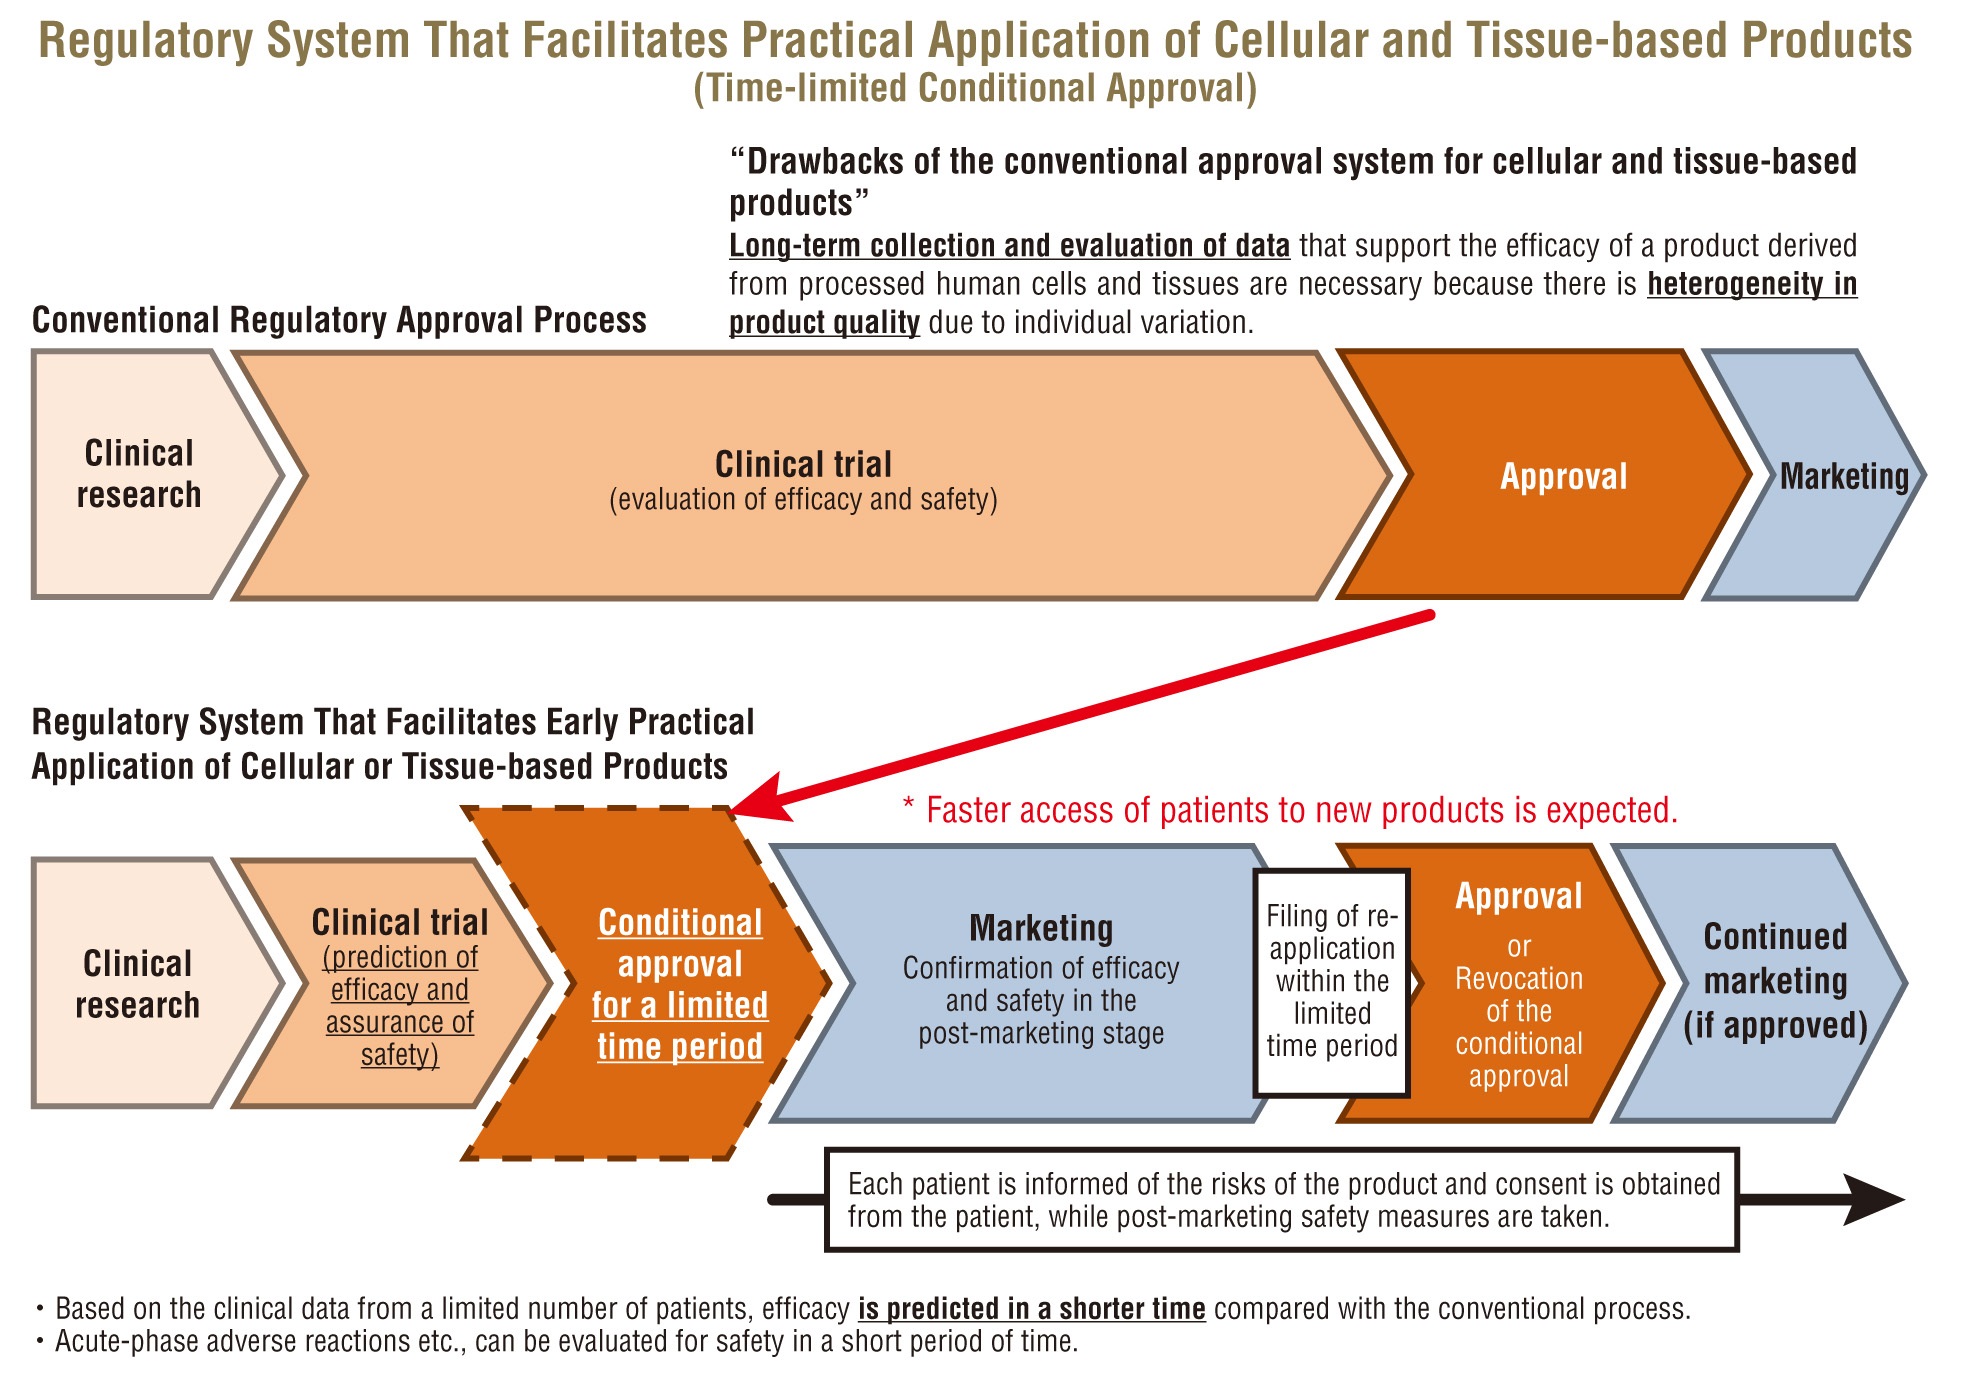 Regulatory System That Facilitates Practical Application of Cellular and Tissue-based Products